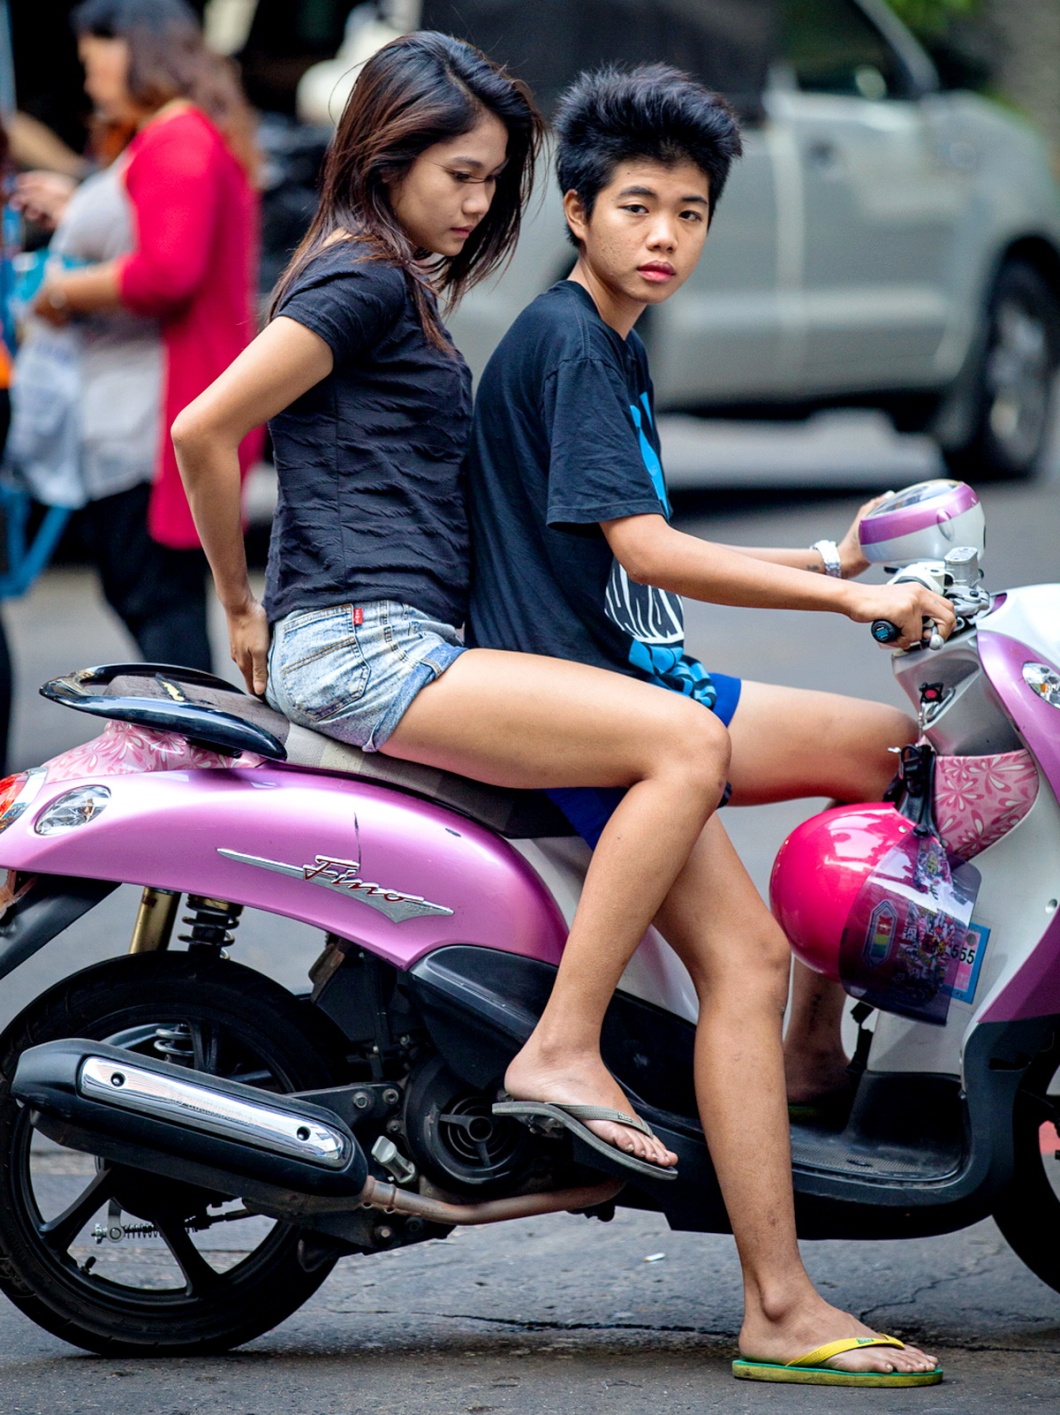 Thai Girls Side Saddle Why Do They Ride This Way